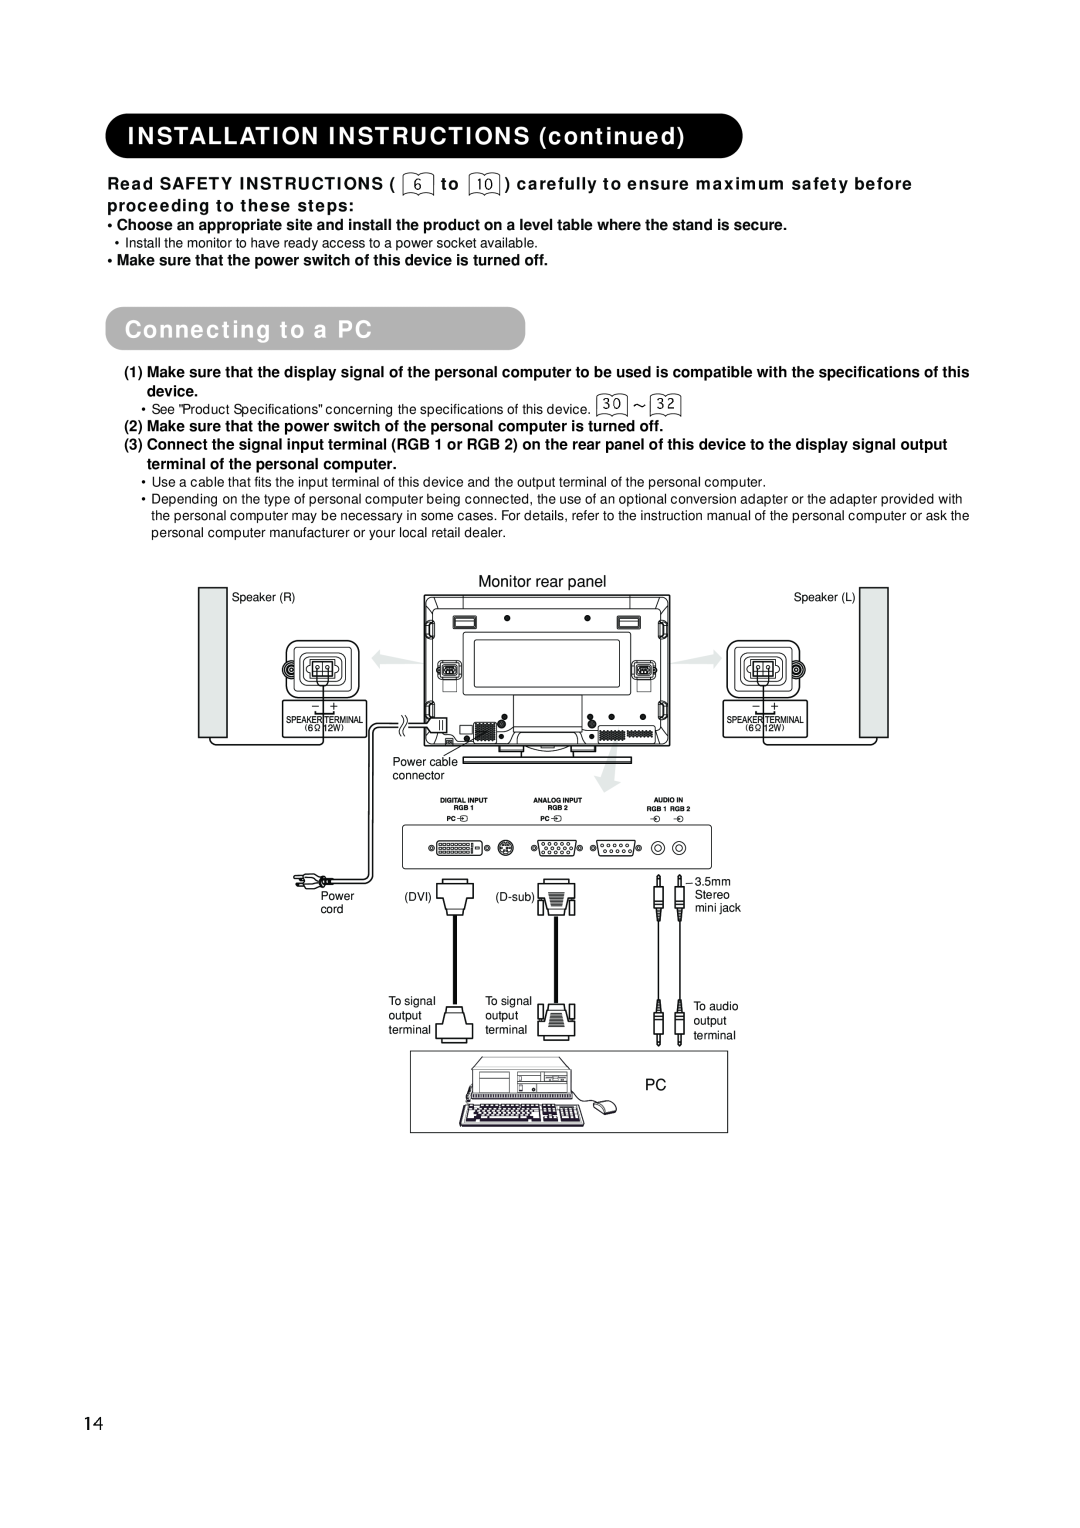 Hitachi PW1A user manual INSTALLATION INSTRUCTIONS continued, Connecting to a PC, Monitor rear panel 